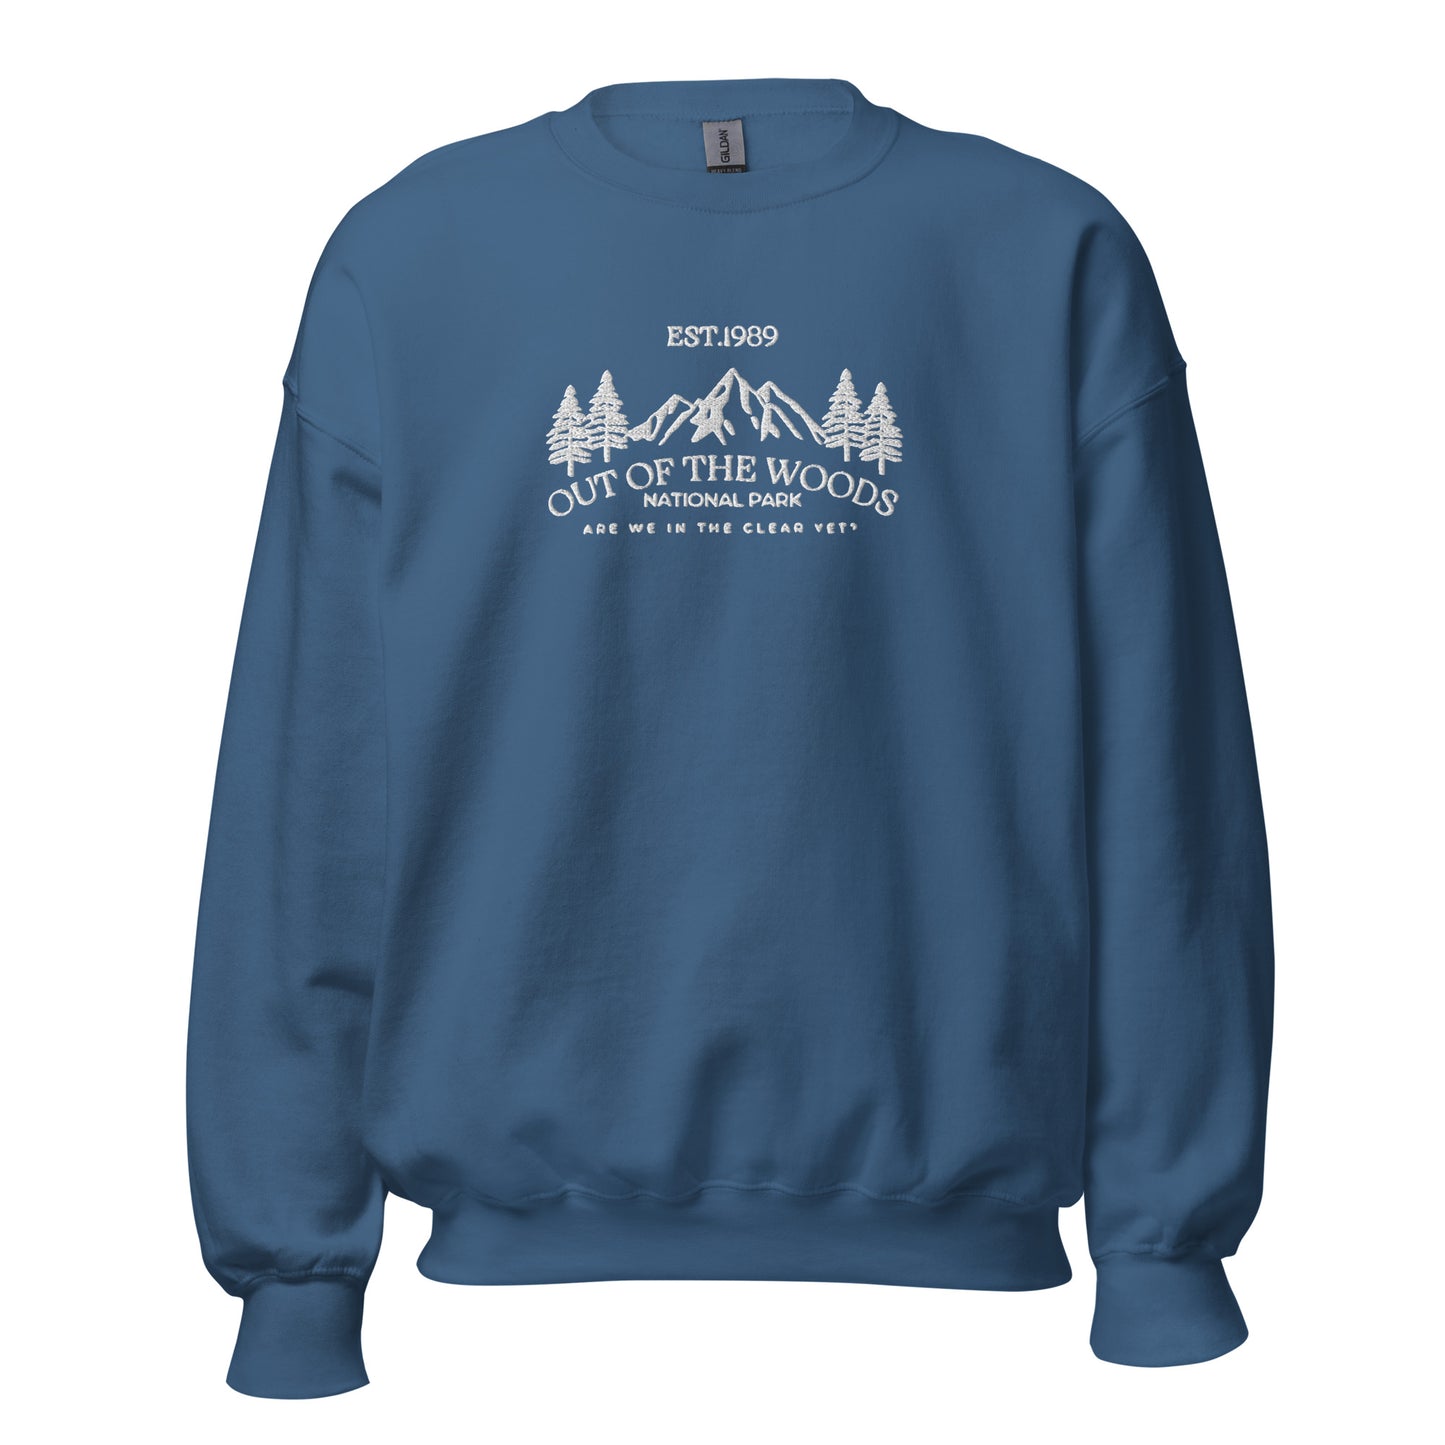 the ORIGINAL in the clear yet national park embroidered crewneck